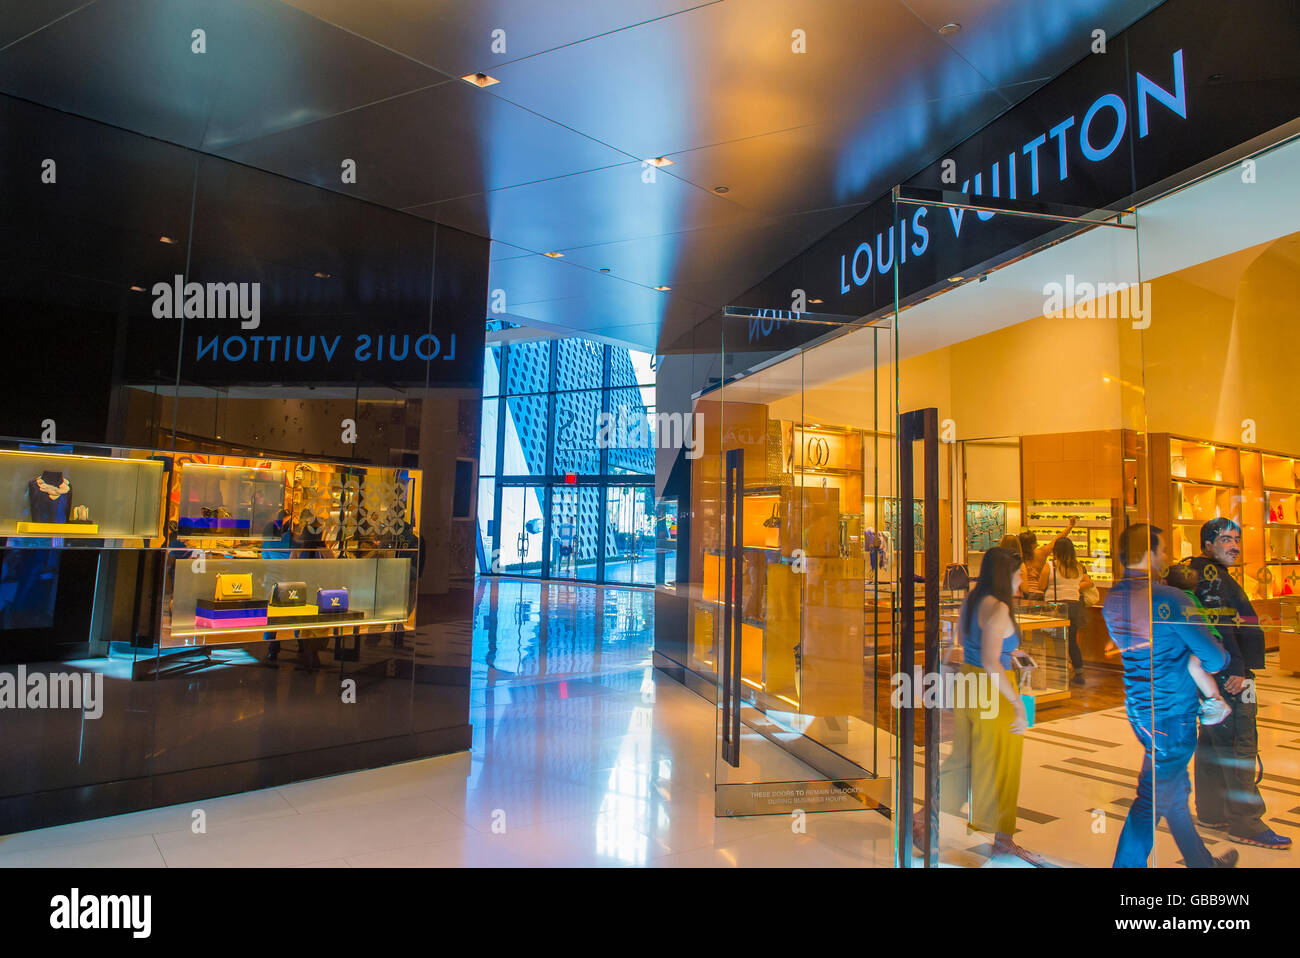 Louis Vuitton Brand Store in the City Center Editorial Stock Photo - Image  of clothing, shopping: 275420083